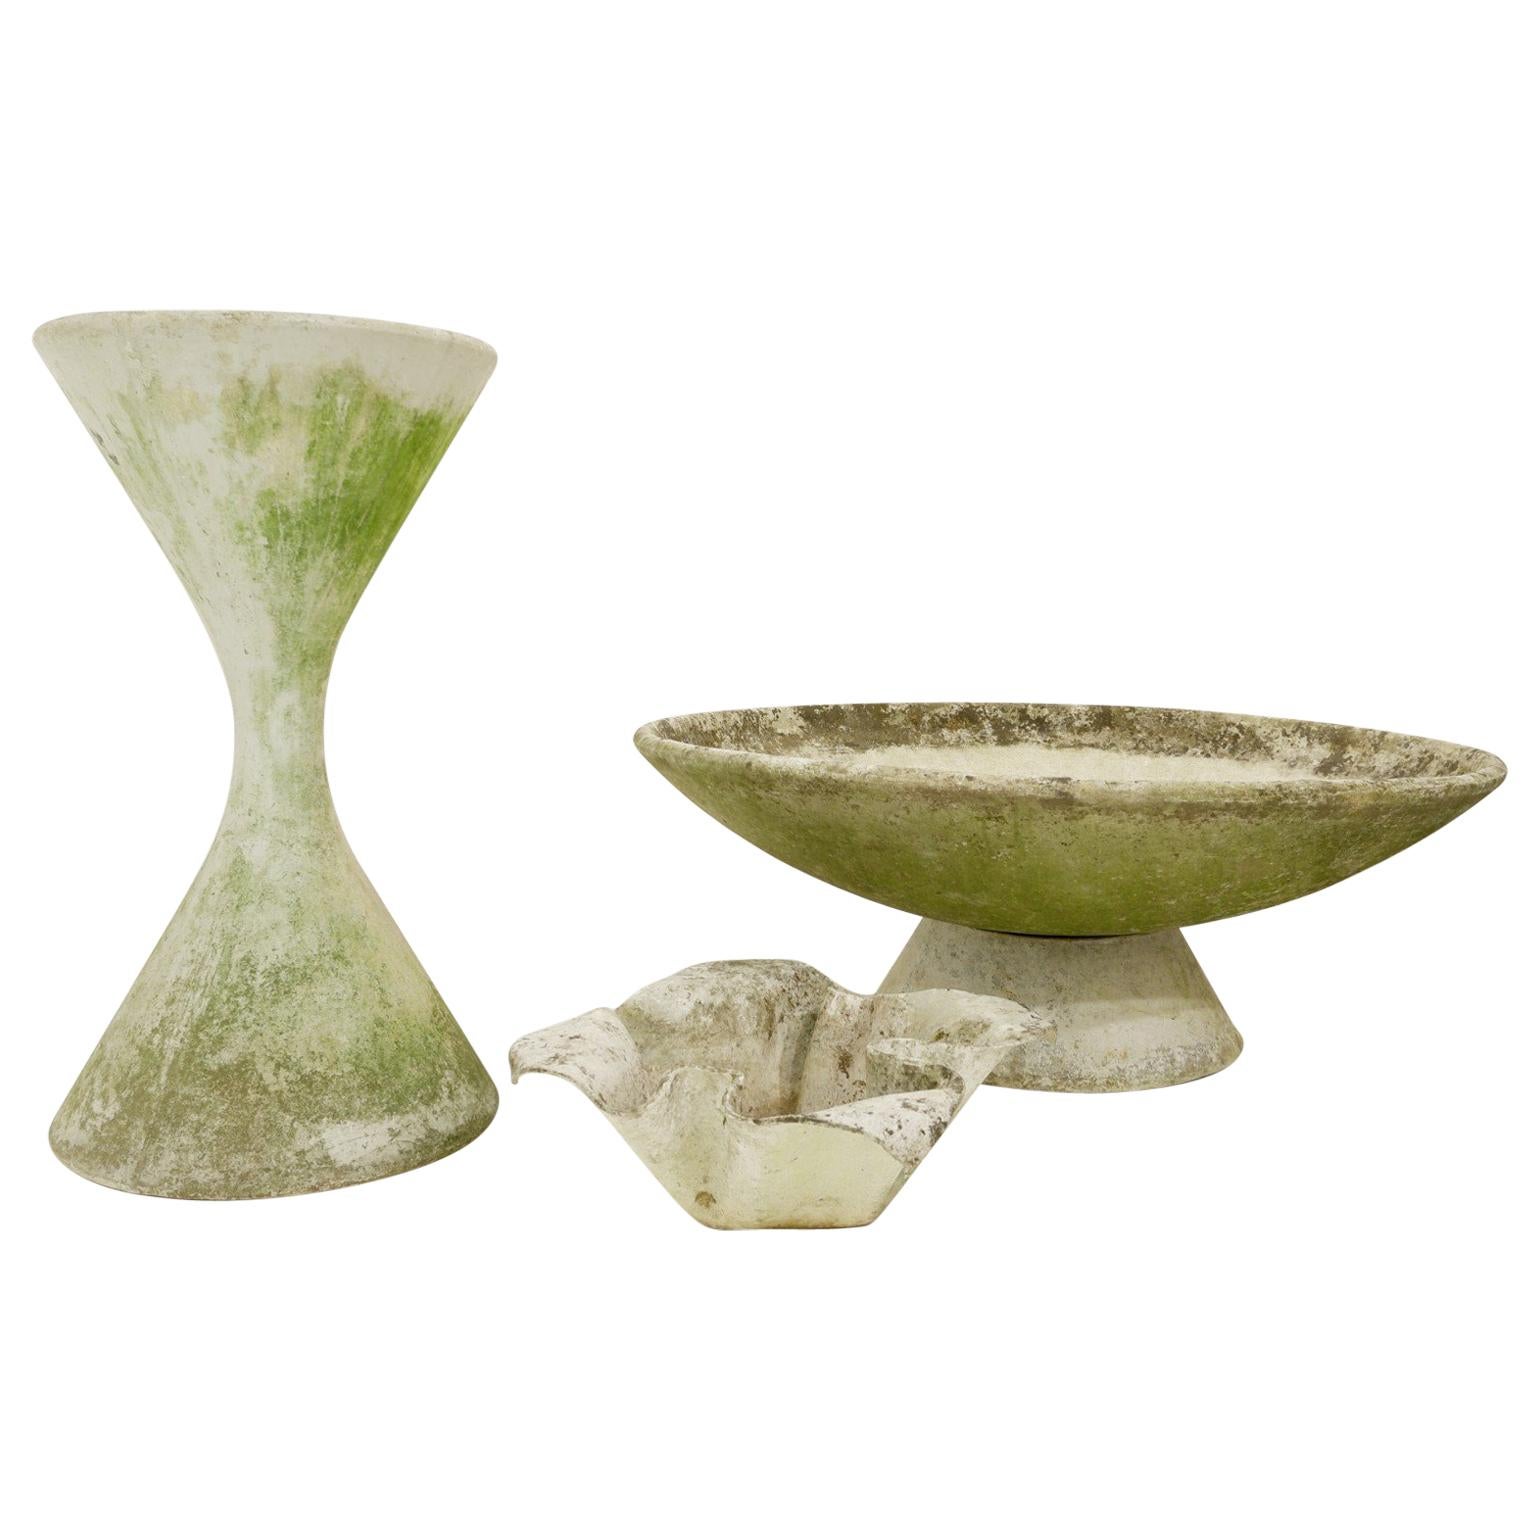 Diabolo, Handkerchief and Large Willy Guhl Bowl Eternit Planters